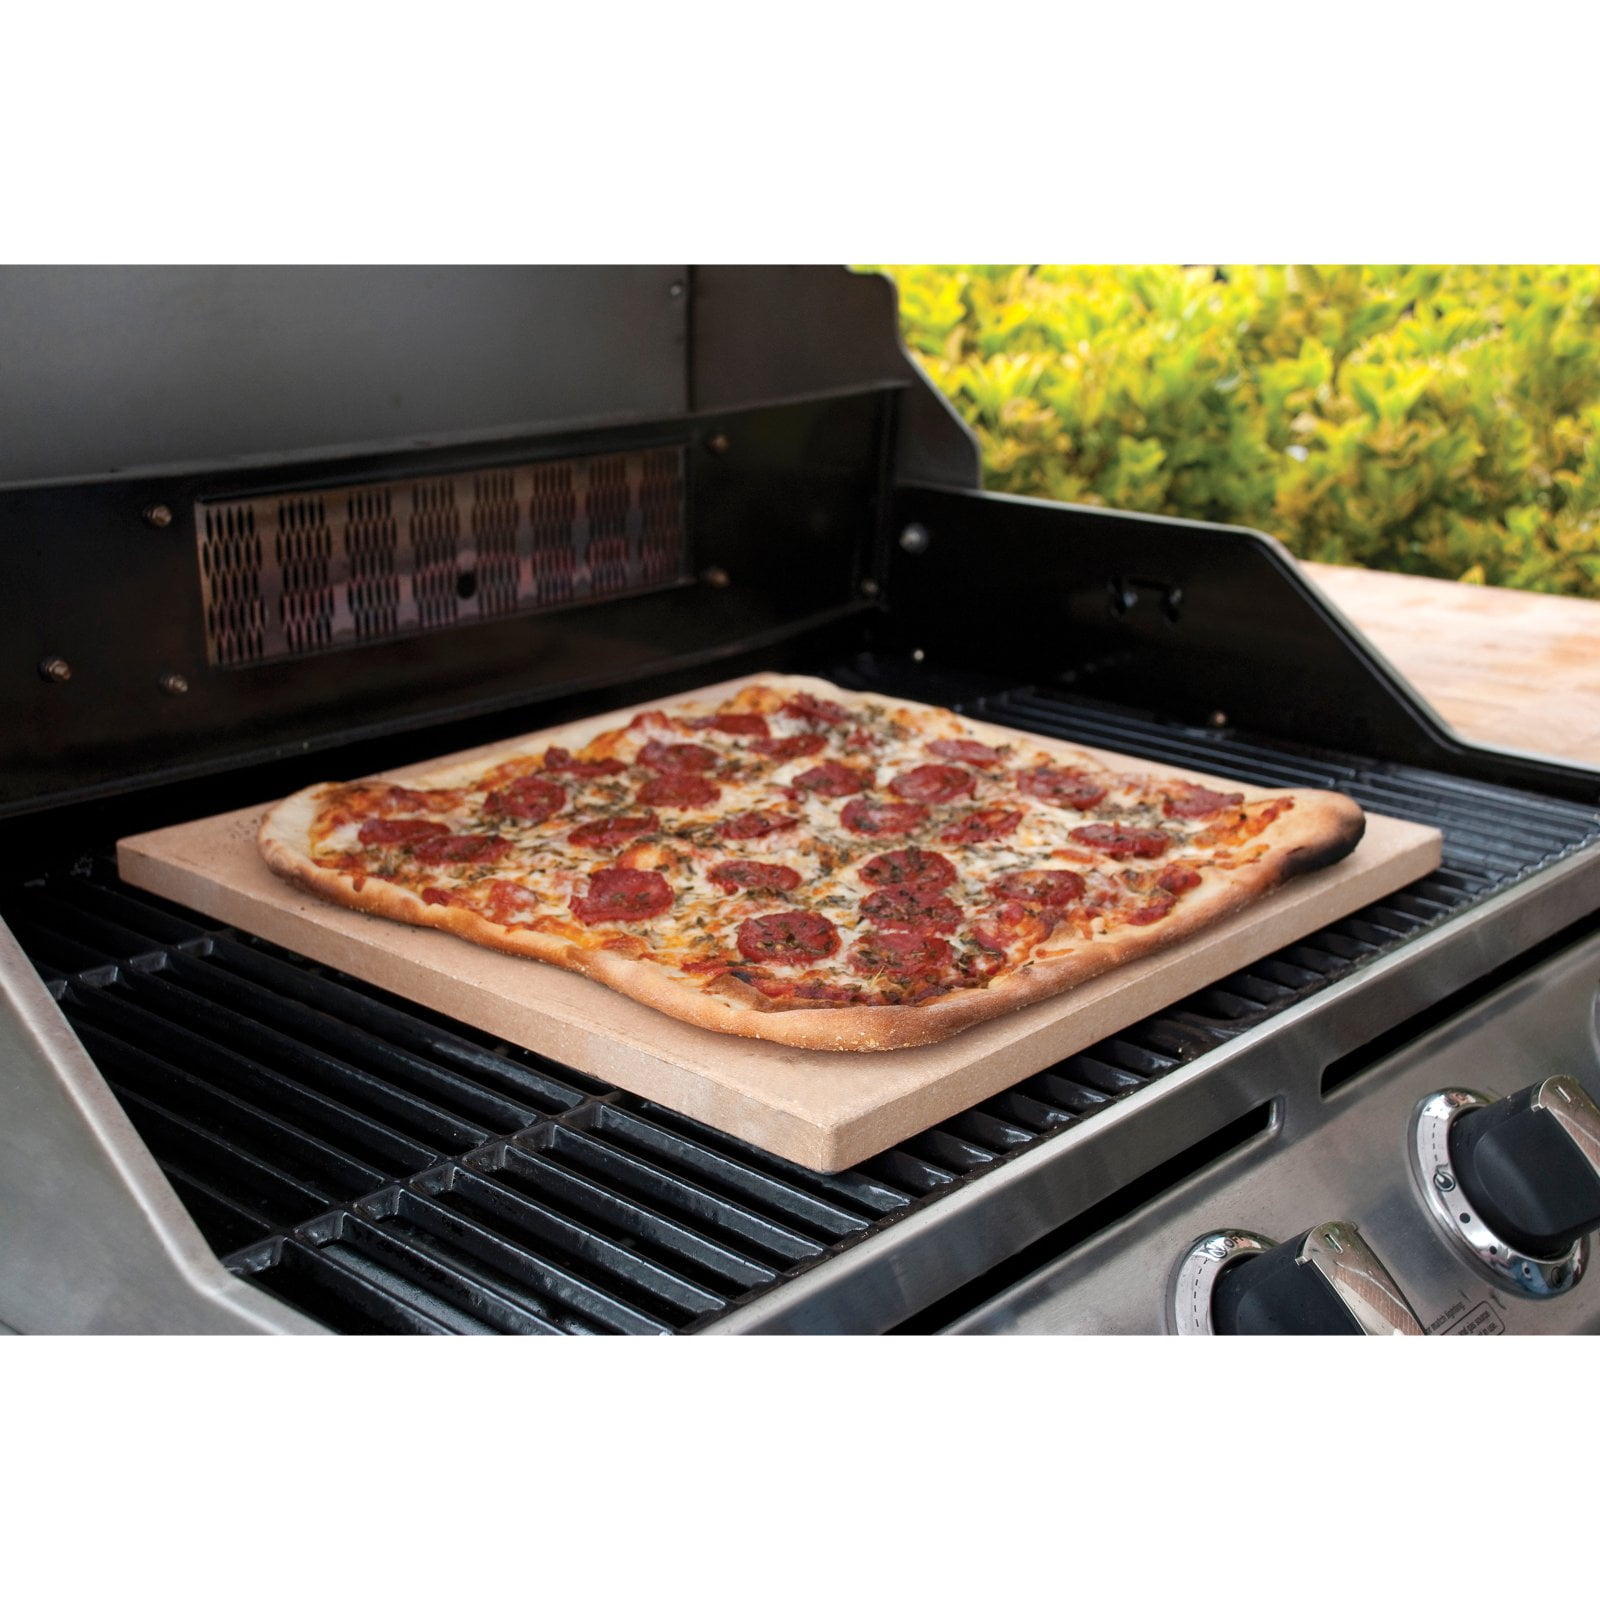 Details about   amzdeal Pizza Stone for Grill and Oven 15x12 Inch Rectangular PZ-01 